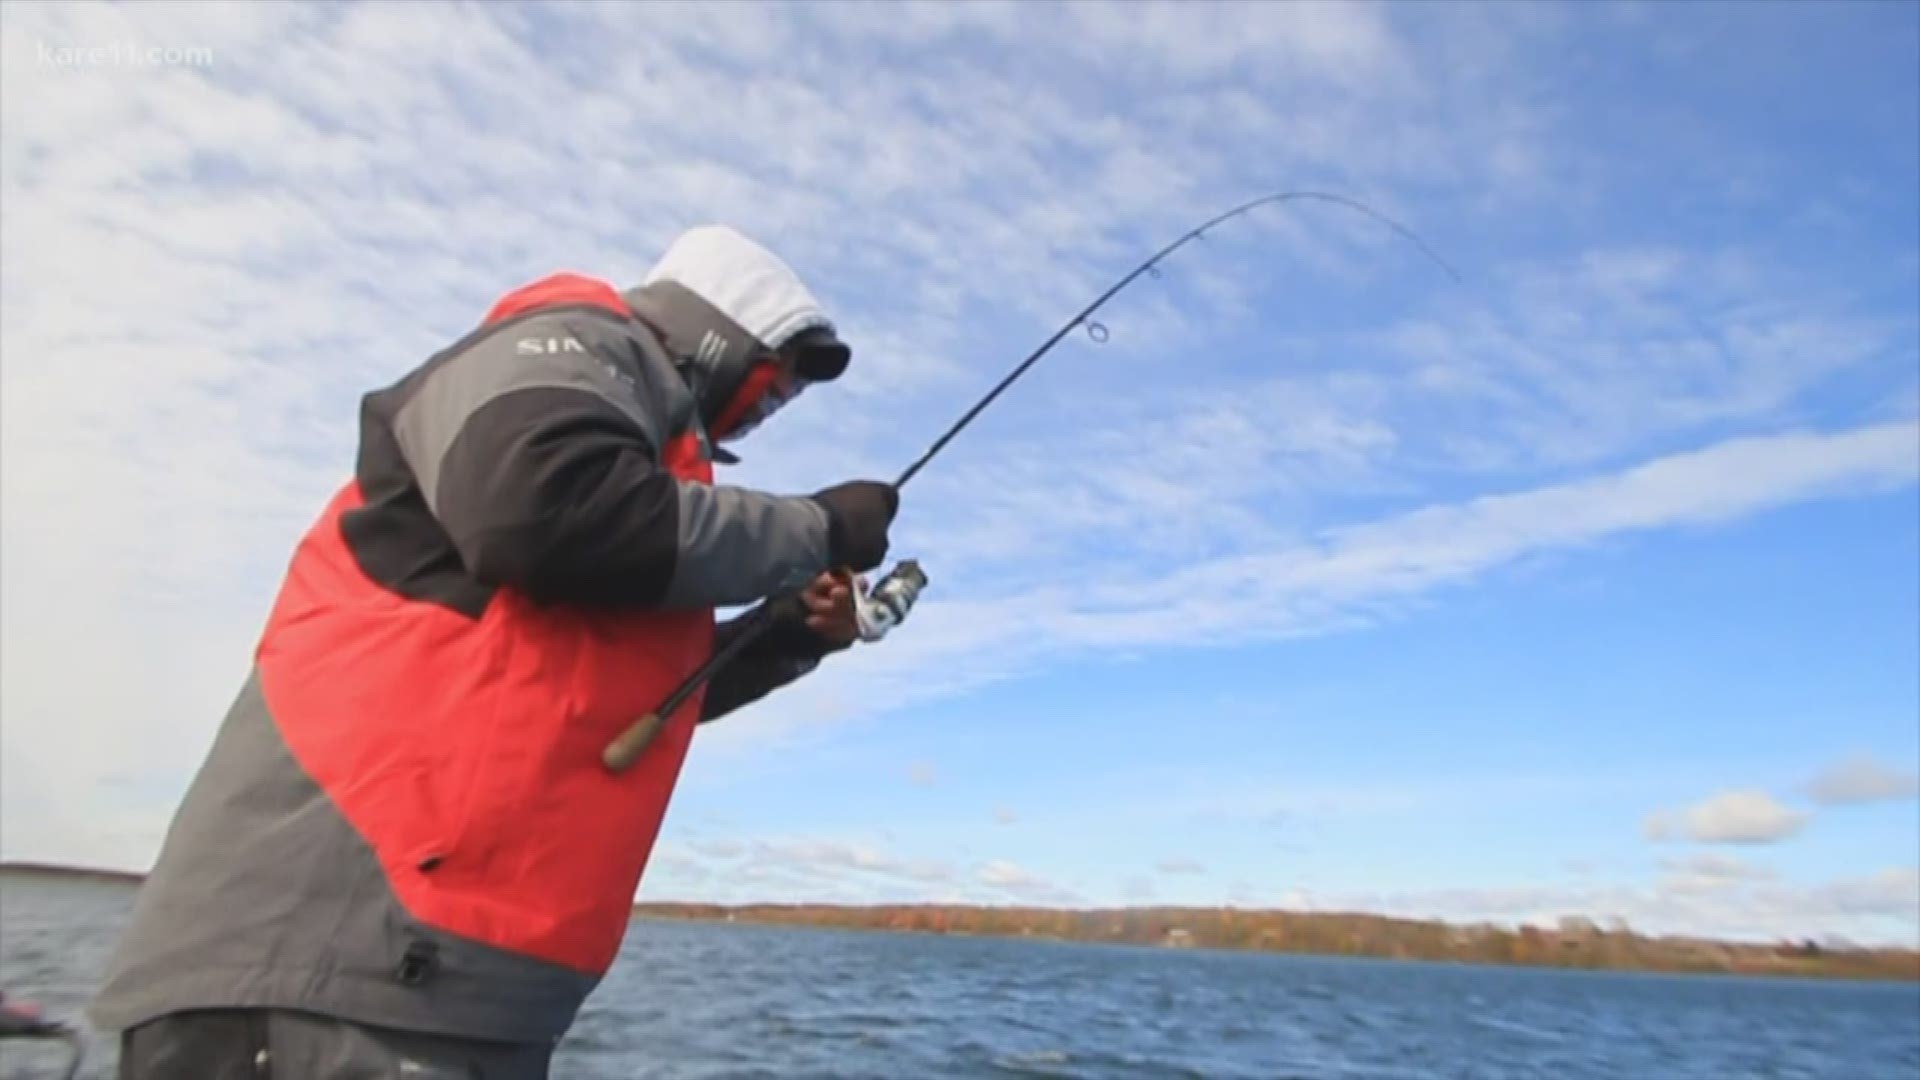 Regulators say state anglers stayed well under Mille Lacs' safe-harvest allocation for walleyes last year. With the walleye population improving, the DNR will allow some walleye harvest when the season opens May 11. https://kare11.tv/2GybnwH